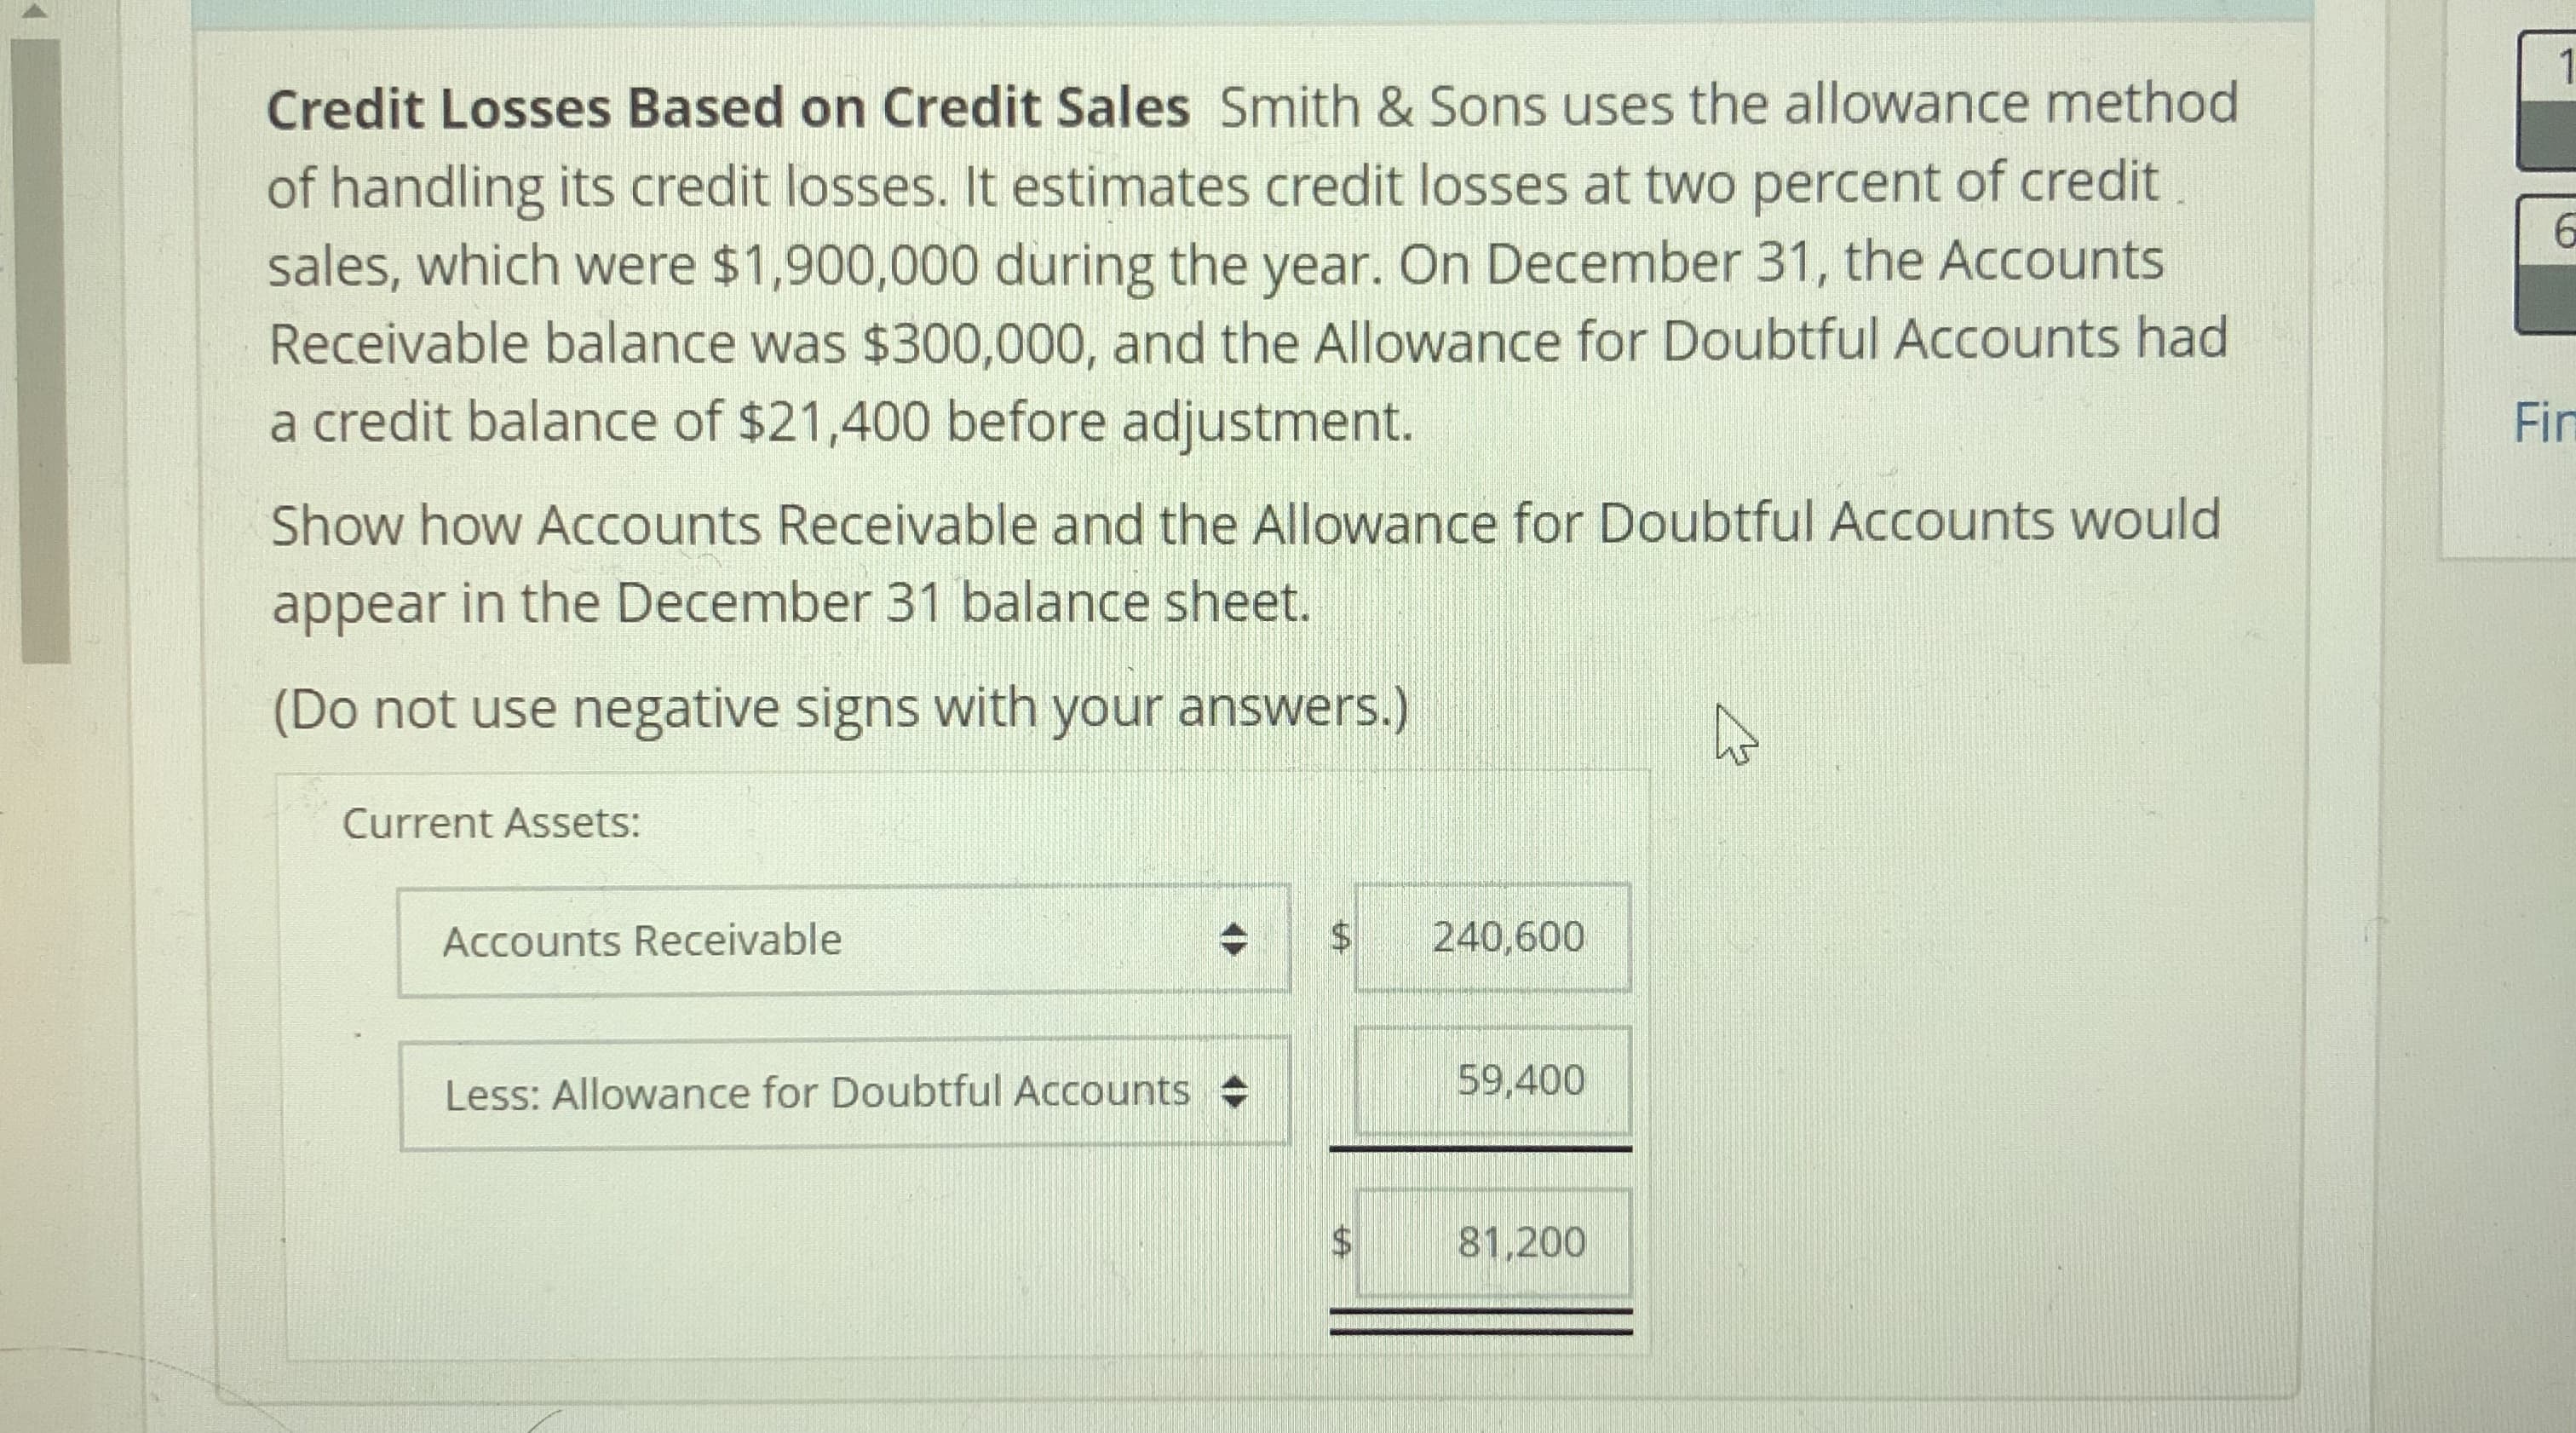 Credit Losses Based on Credit Sales Smith & Sons uses the allowance method
of handling its credit losses. It estimates credit losses at two percent of credit
sales, which were $1,900,000 during the year. On December 31, the Accounts
Receivable balance was $300,000, and the Allowance for Doubtful Accounts had
a credit balance of $21,400 before adjustment.
Show how Accounts Receivable and the Allowance for Doubtful Accounts would
appear in the December 31 balance sheet.
(Do not use negative signs with your answers.)
Fin
Current Assets:
Accounts Receivable
$ 240,600
eli-LE9,400
Less: Allowance for Doubtful Accounts
$81.200
